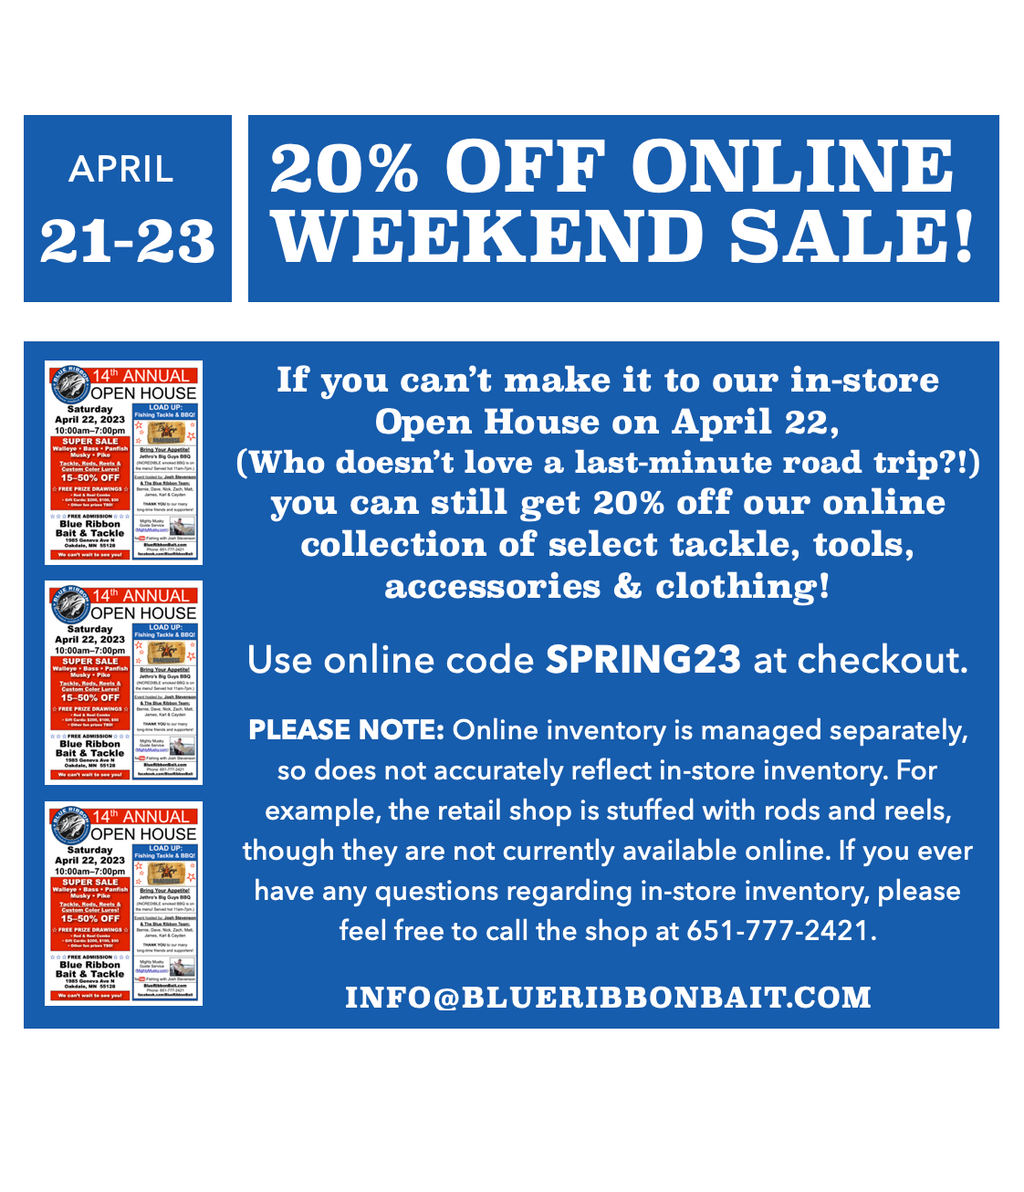 "Open House" Sale for Online Customers